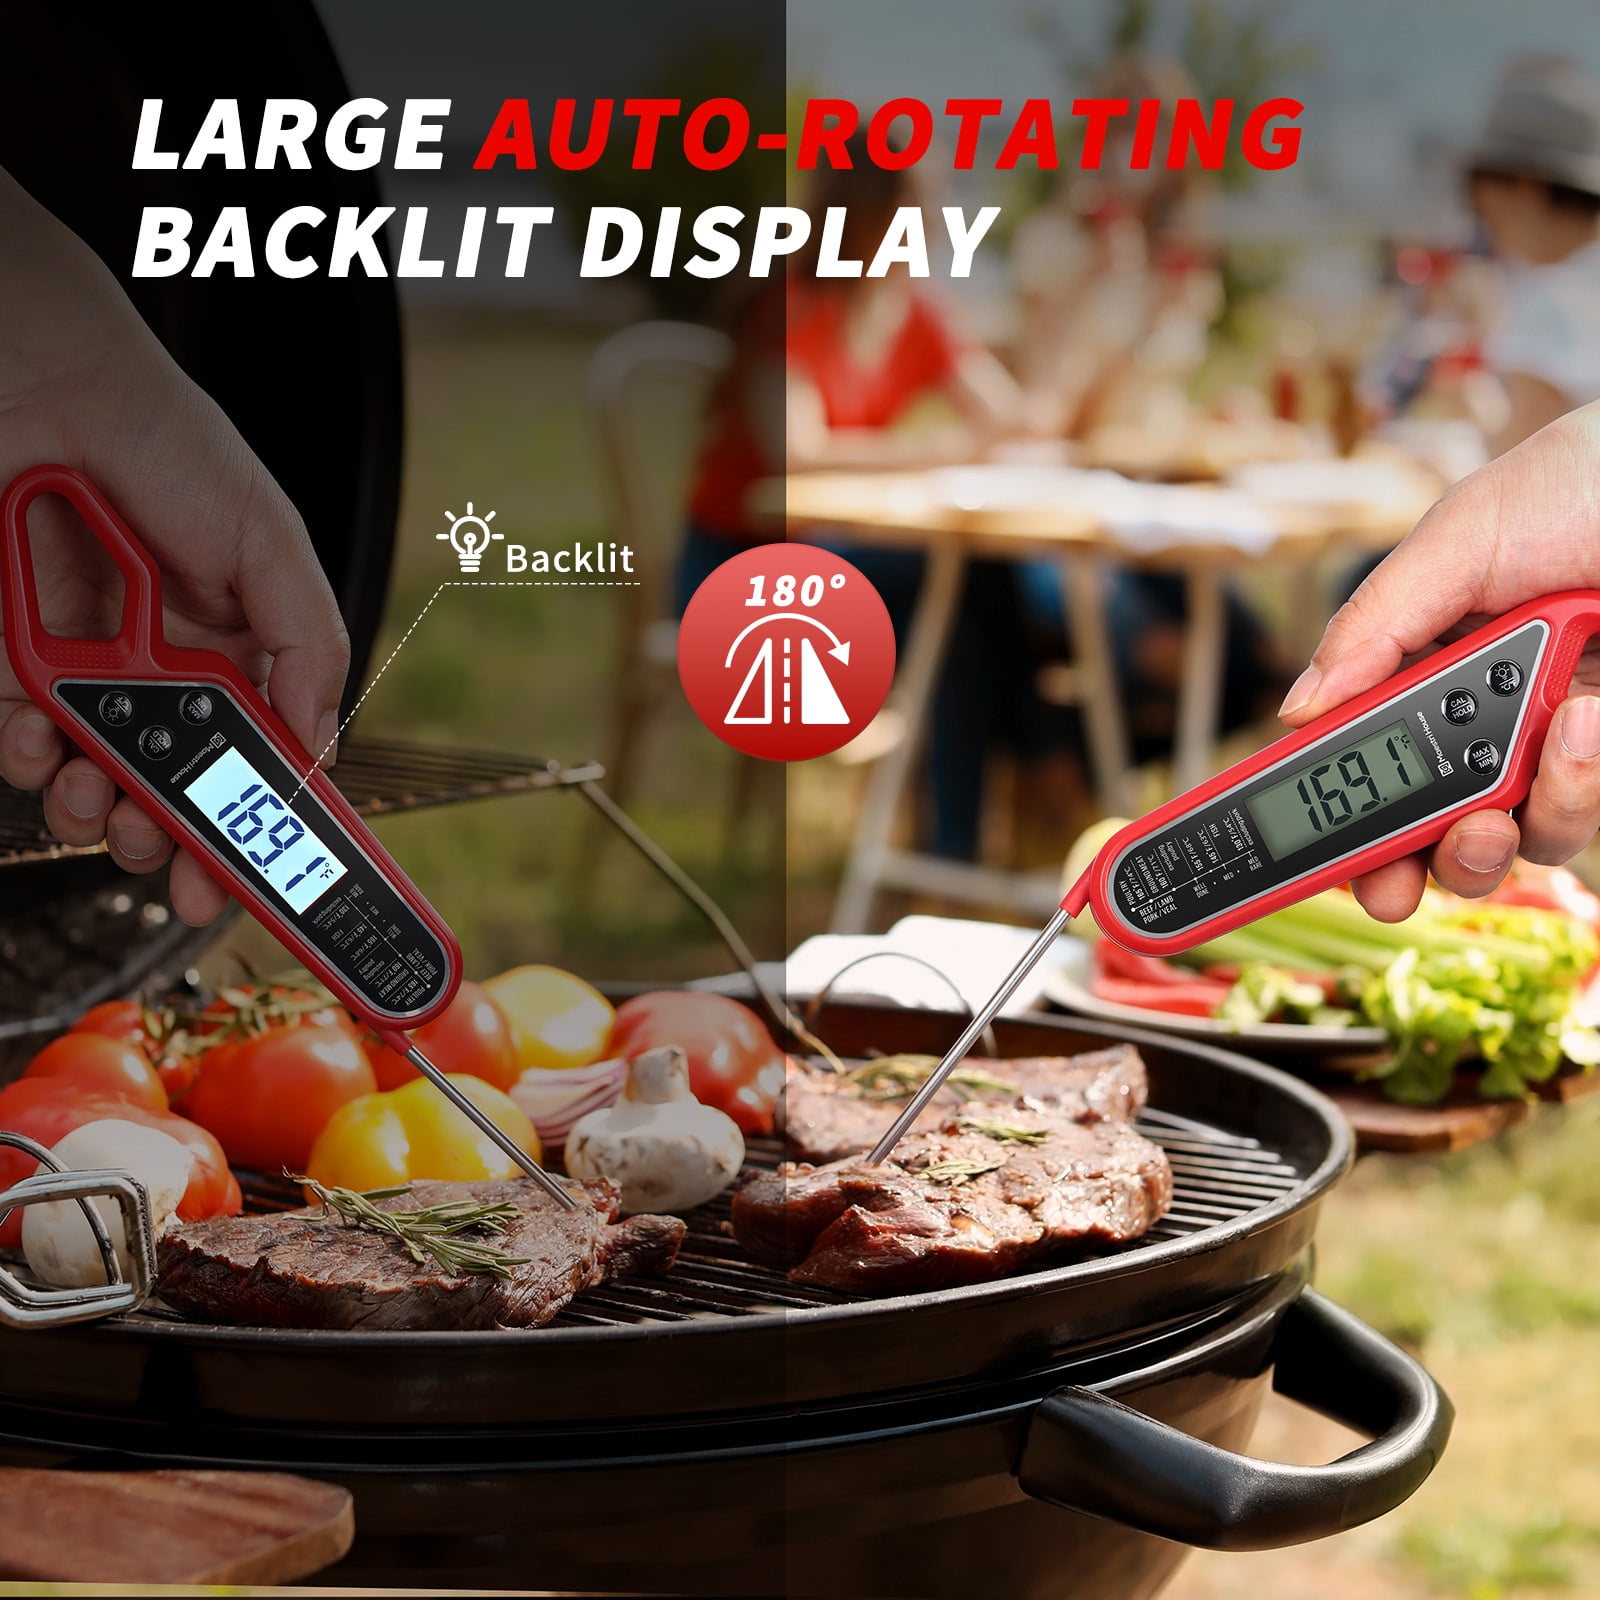 Digital Meat & Food Cooking Thermometer| Instant Read, Electric, Mini  Foldable Kitchen Probe for Steak, BBQ, Grill, Candy, Oven/Smoker/Home  Cooking